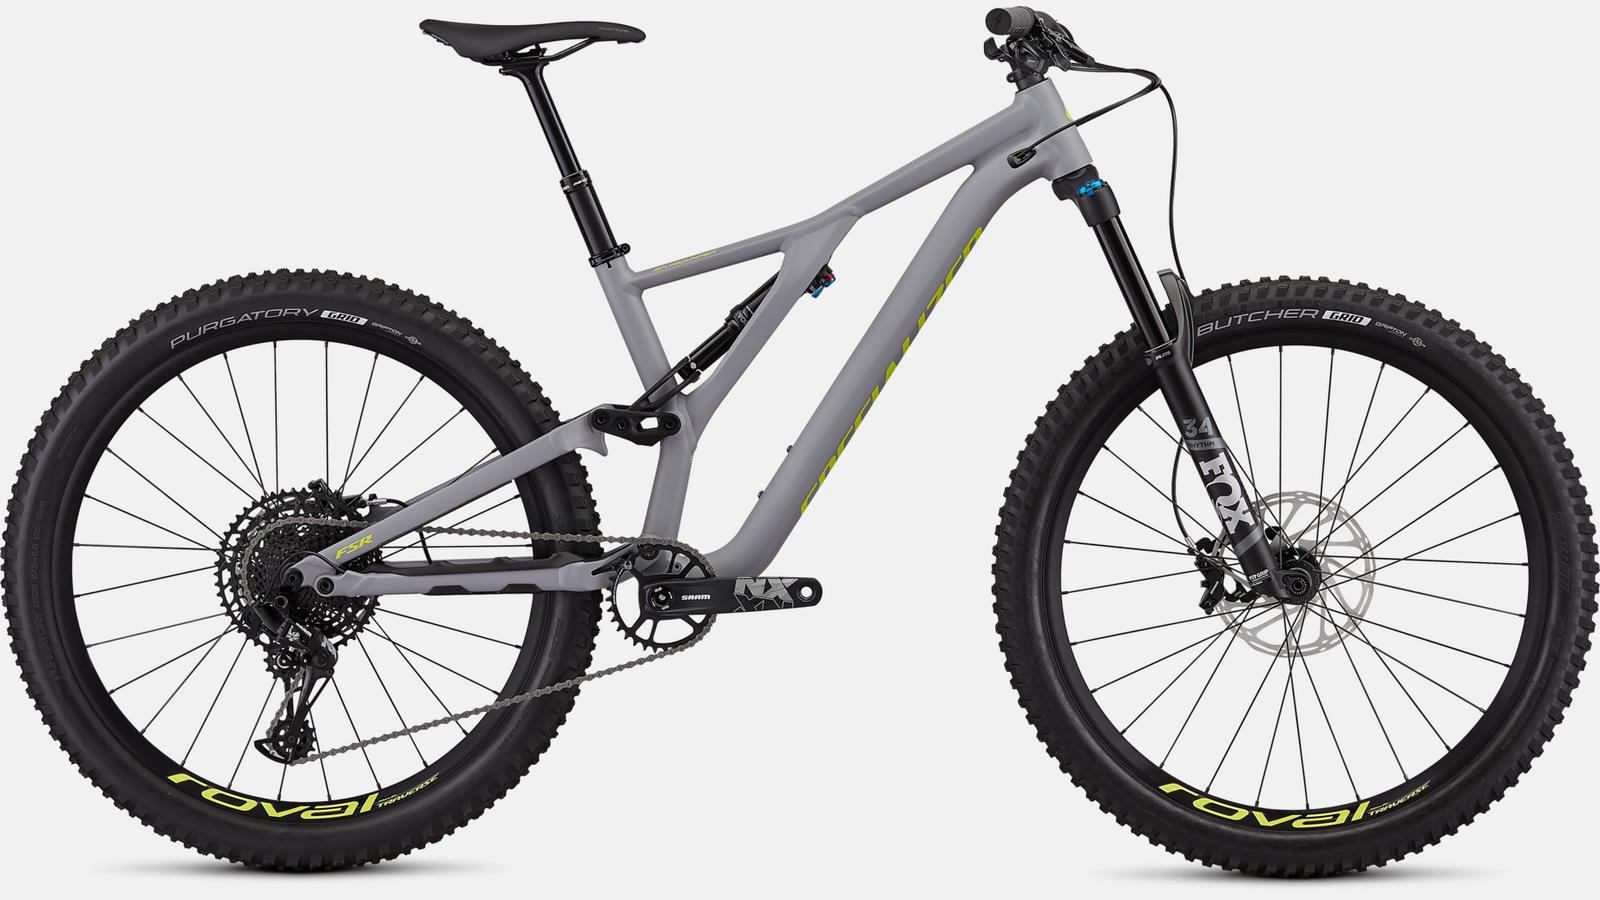 Paint for 2019 Specialized Men's Stumpjumper Comp Alloy 27.5 - 12-speed - Satin Cool Grey